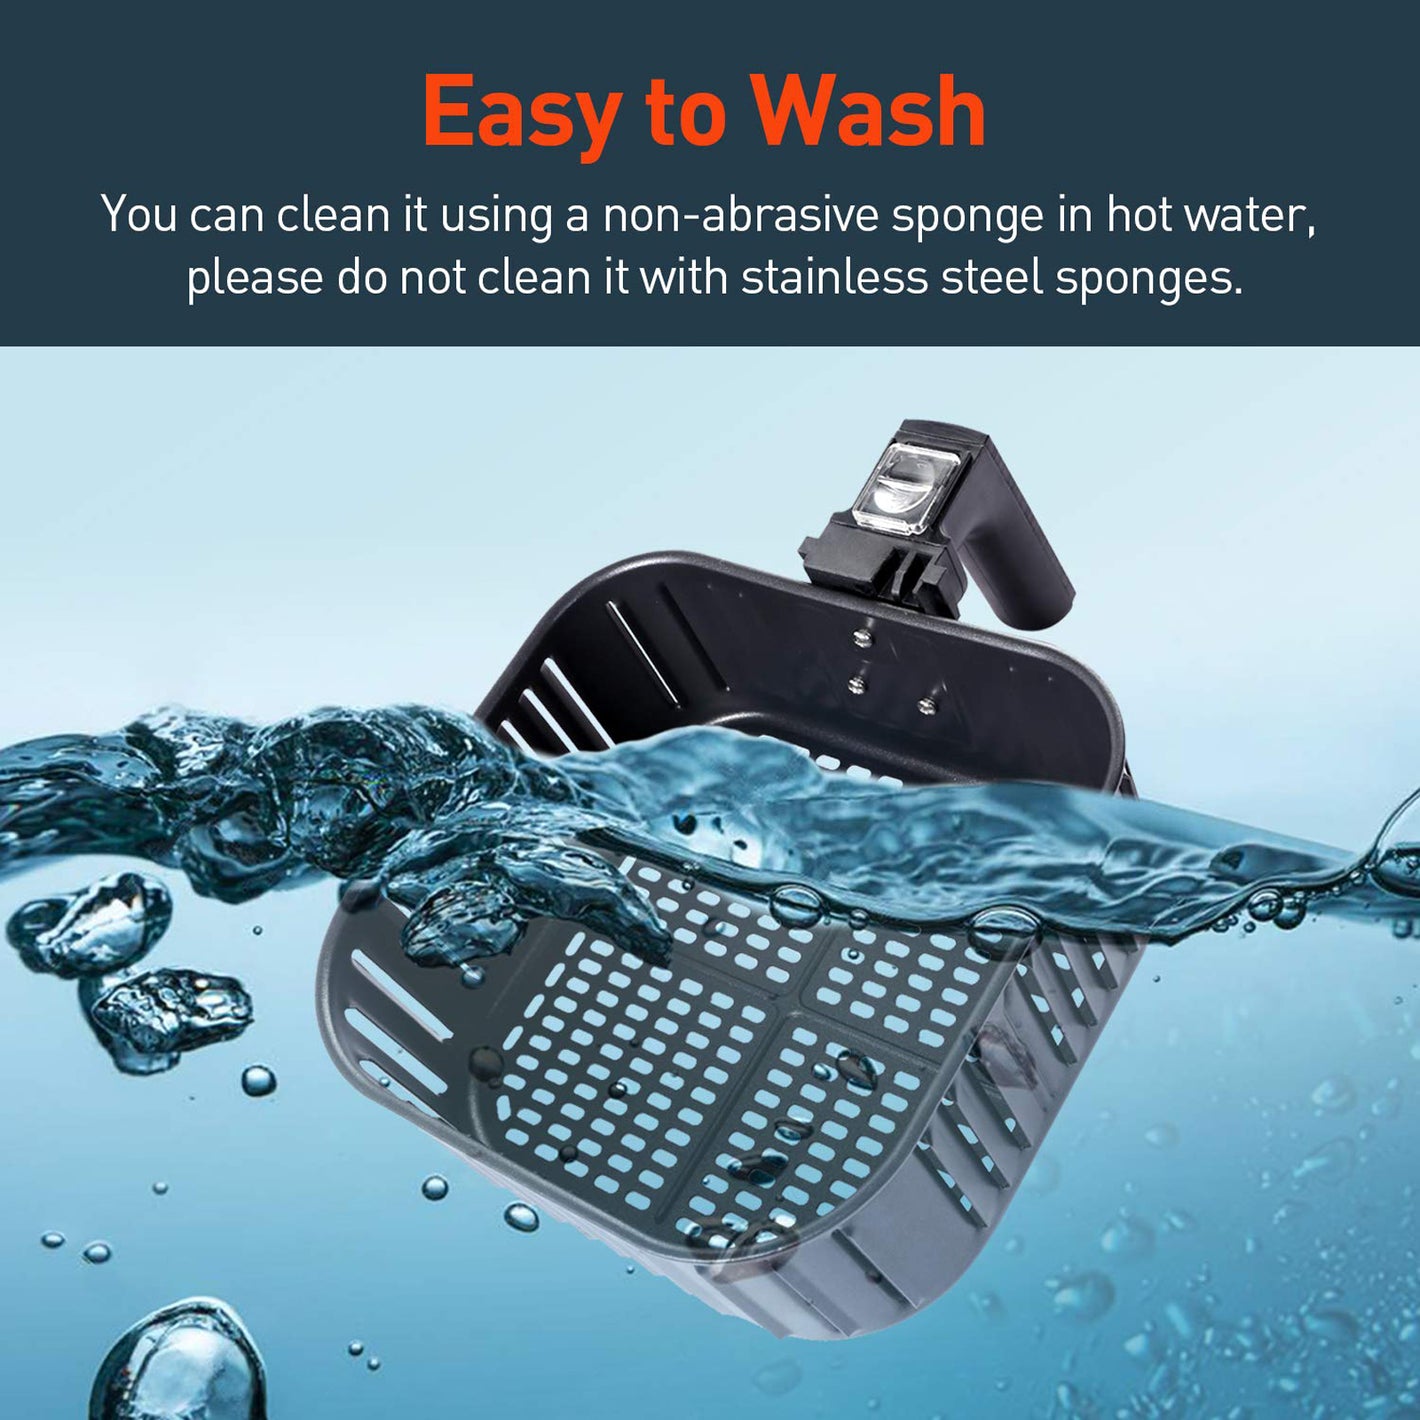 Easy to Wash  You can clean it using a non-abrasive sponge in hot water, please do not clean it with stainless steel sponges.